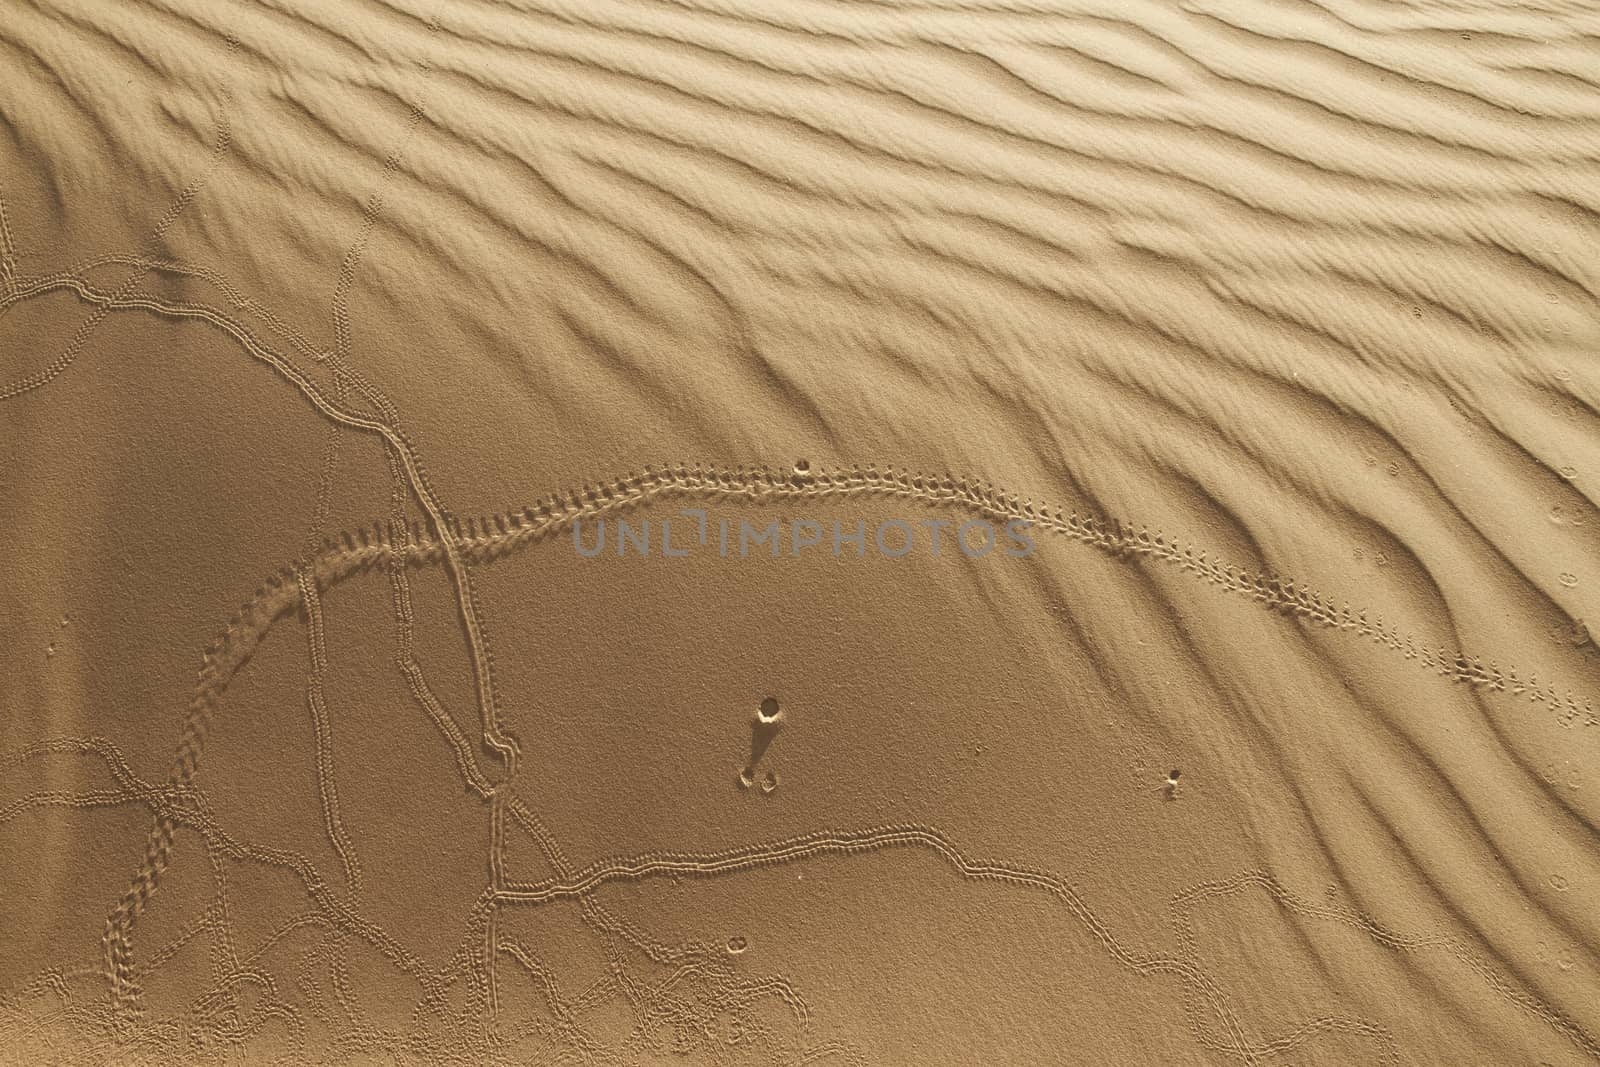 footprint of an insects or animal on desert sand texture by Tjeerdkruse